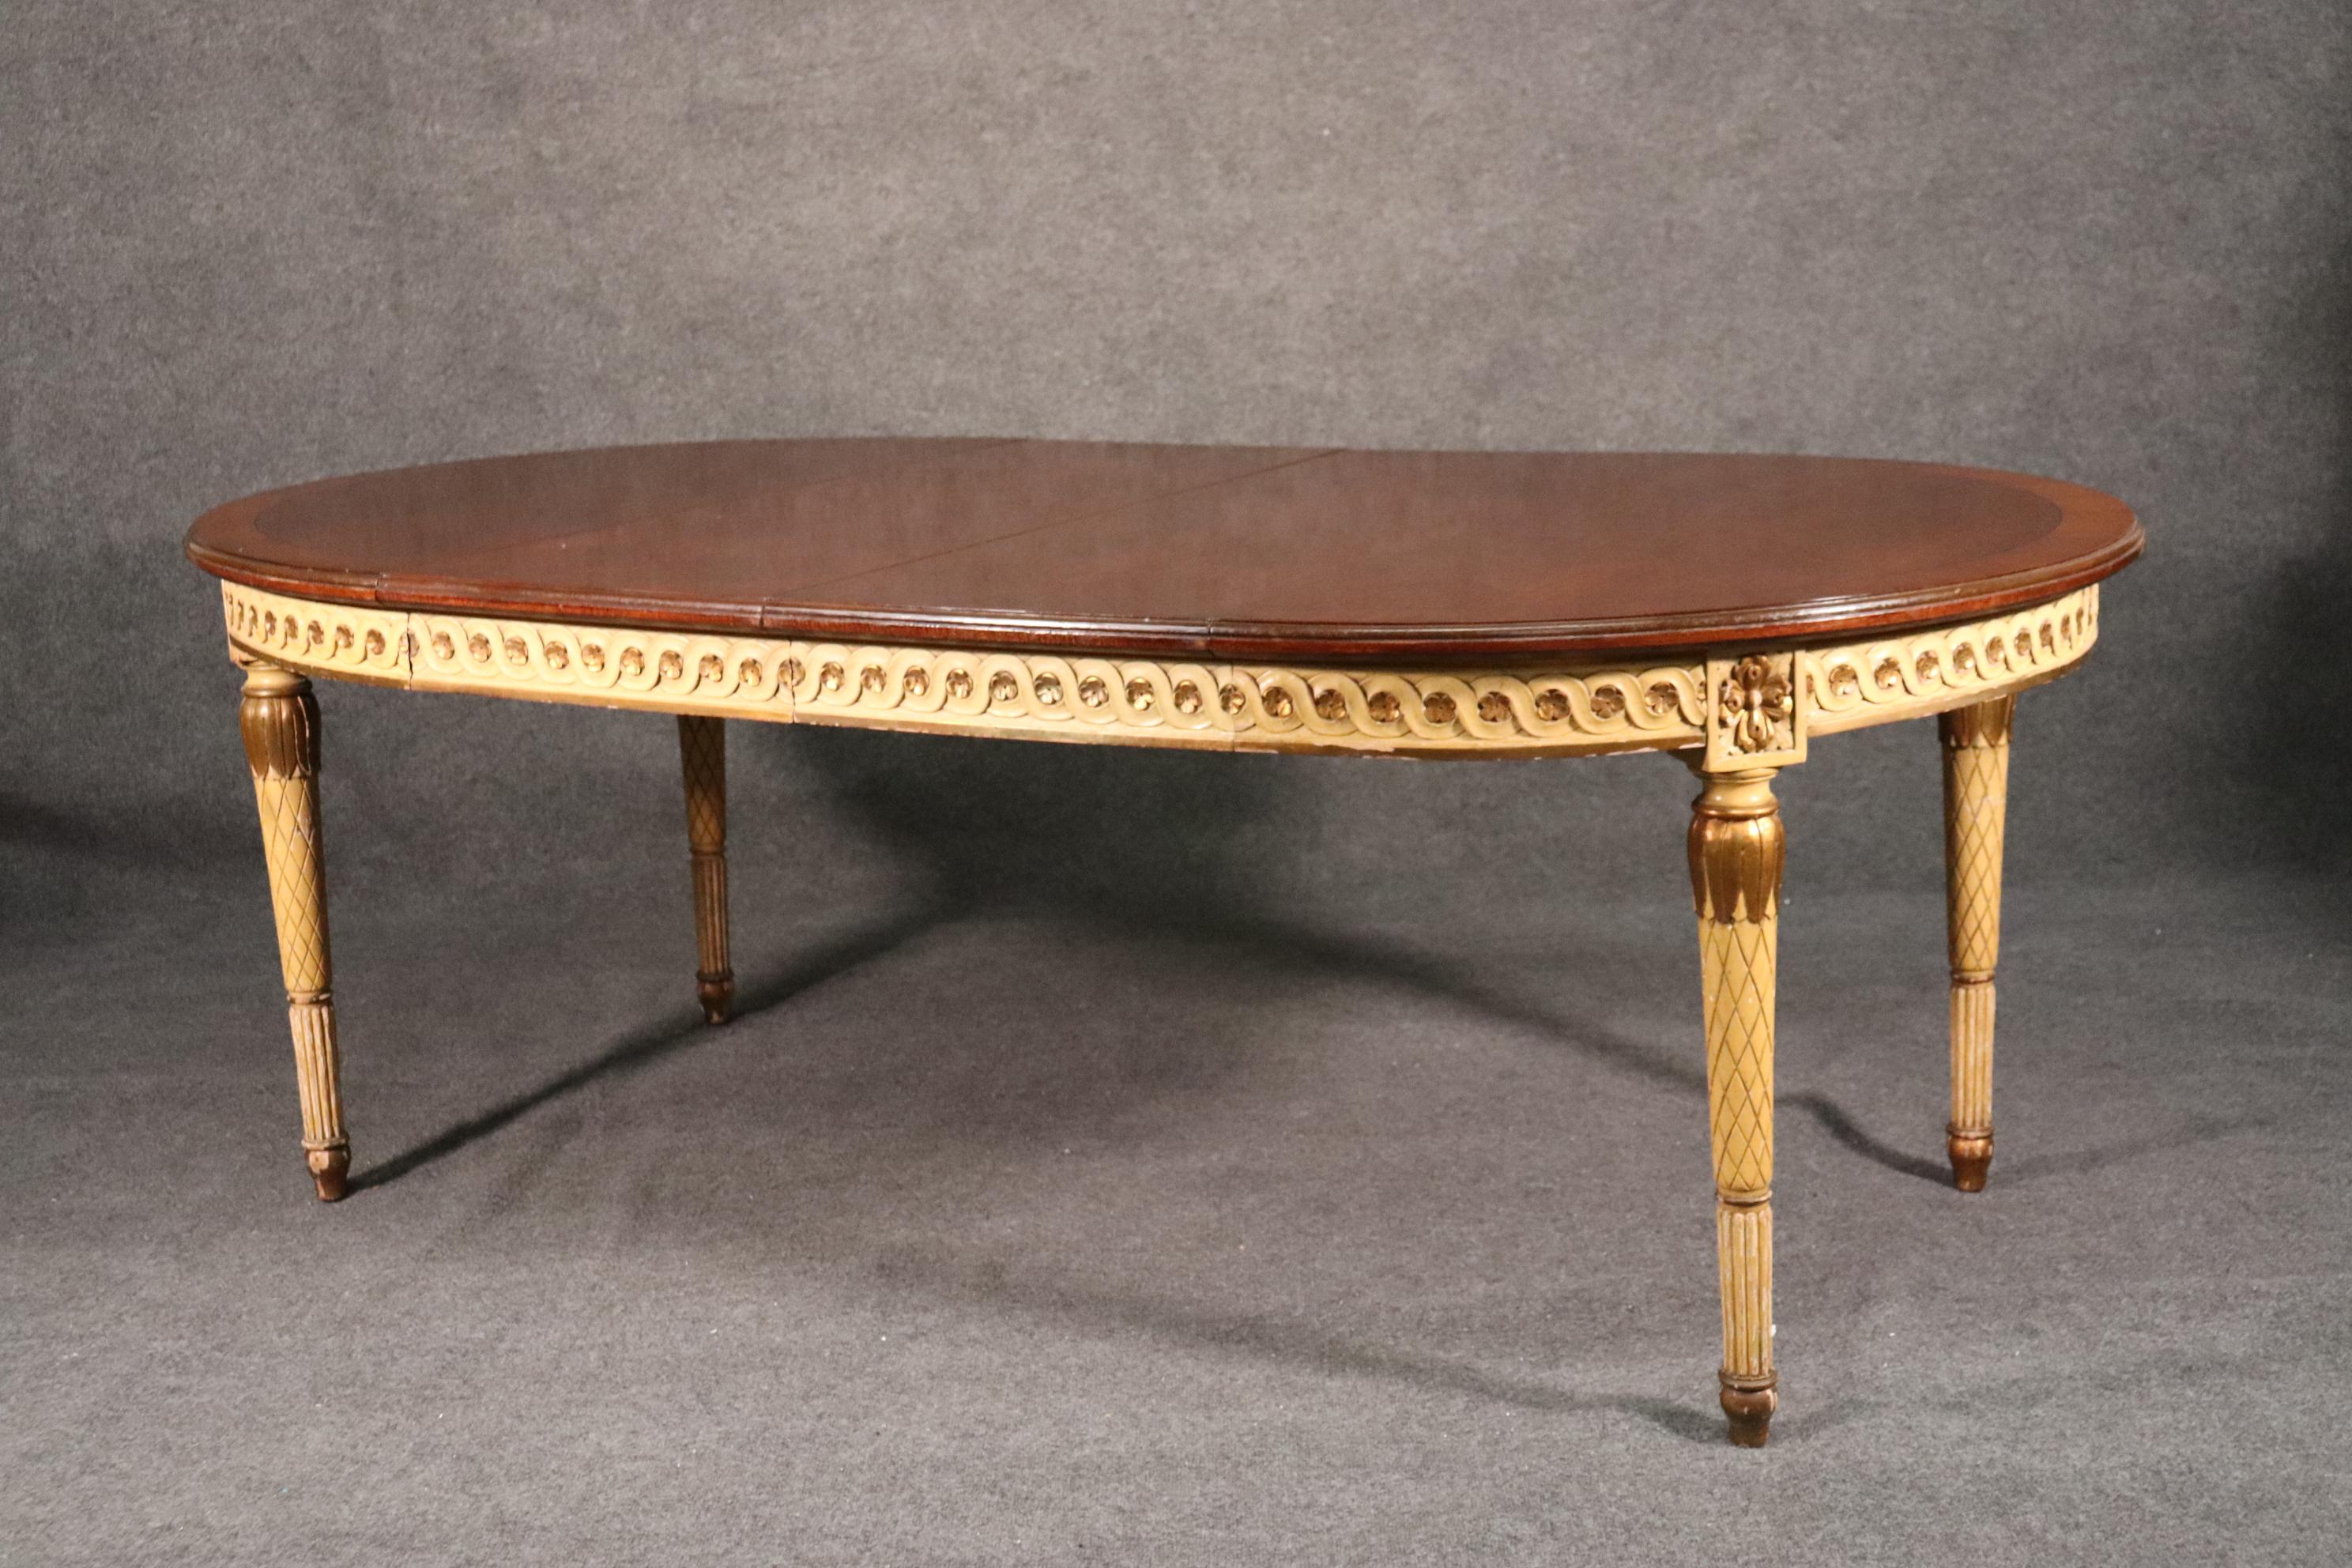 This gorgeous dining table has some beautiful characteristics and a delightful presentation. The top is parquet walnut and the carved frame of the table is in a crème painted finish with gold leaf gilding. The table is 48 x 48 x 30 inches tall and